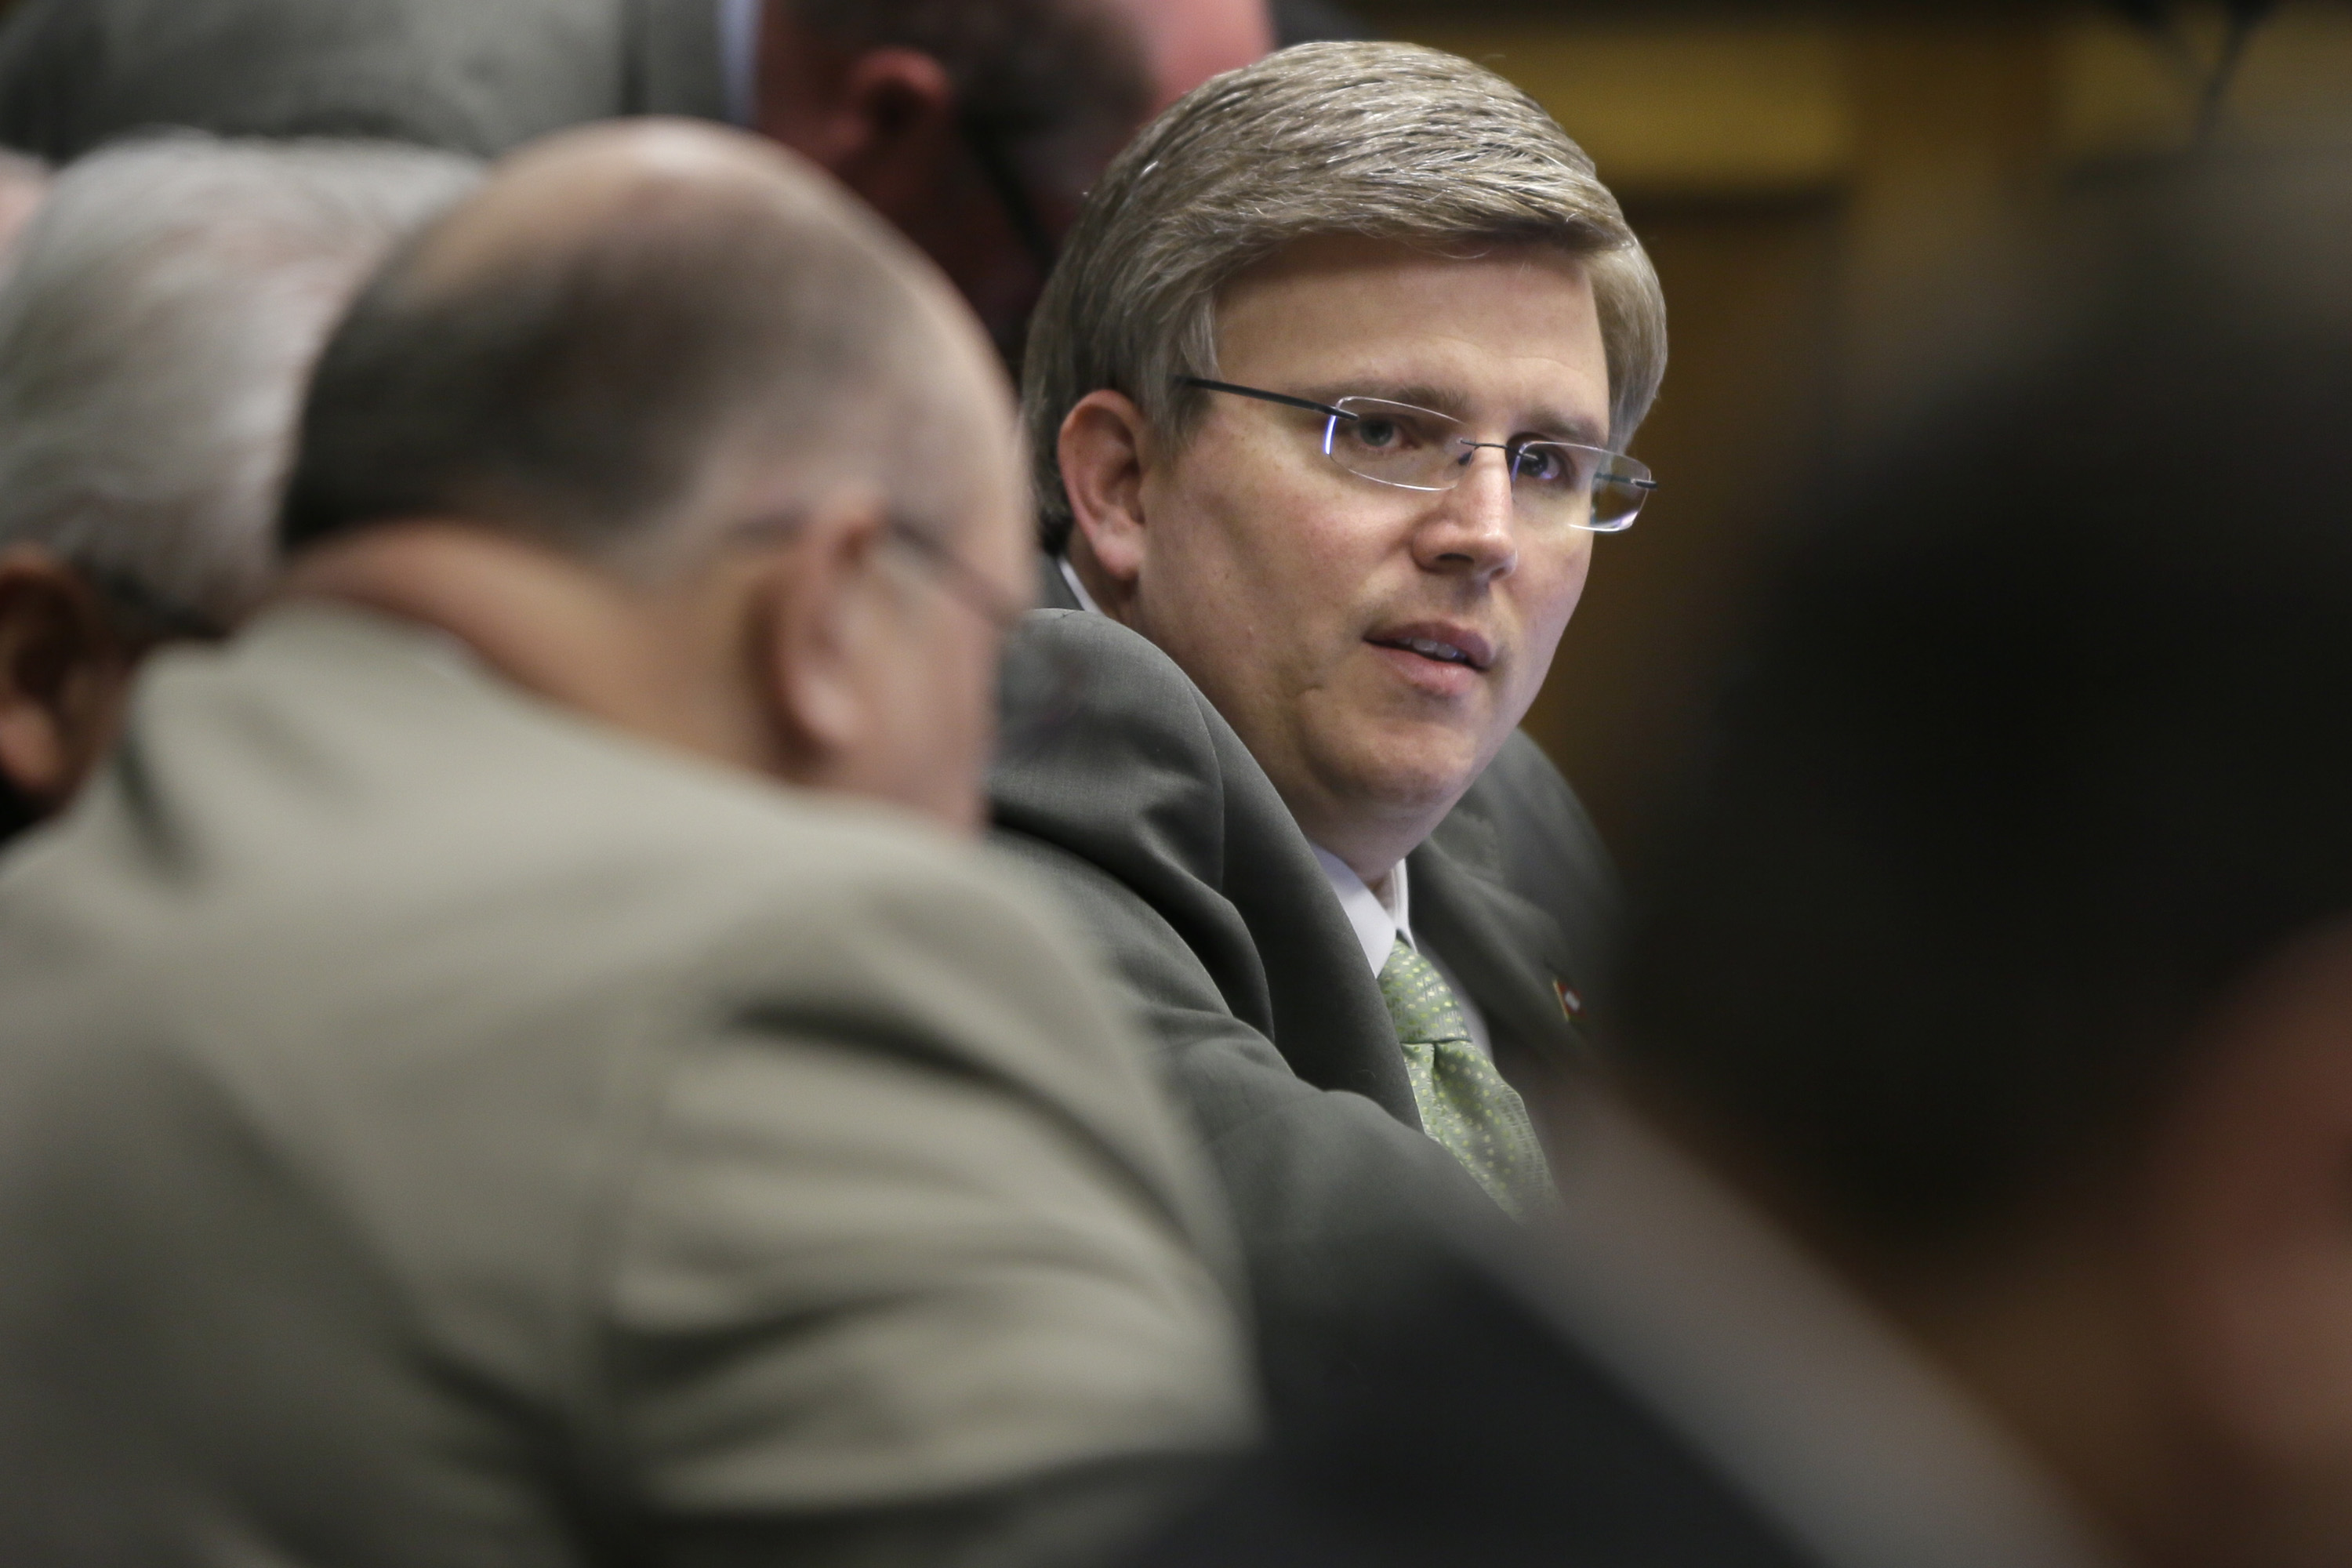 Rep. Justin T. Harris, R-West Fork, questions a witness during a meeting of the House Committee on Education at the Arkansas state Capitol in Little Rock, Ark. on Feb. 26, 2015.